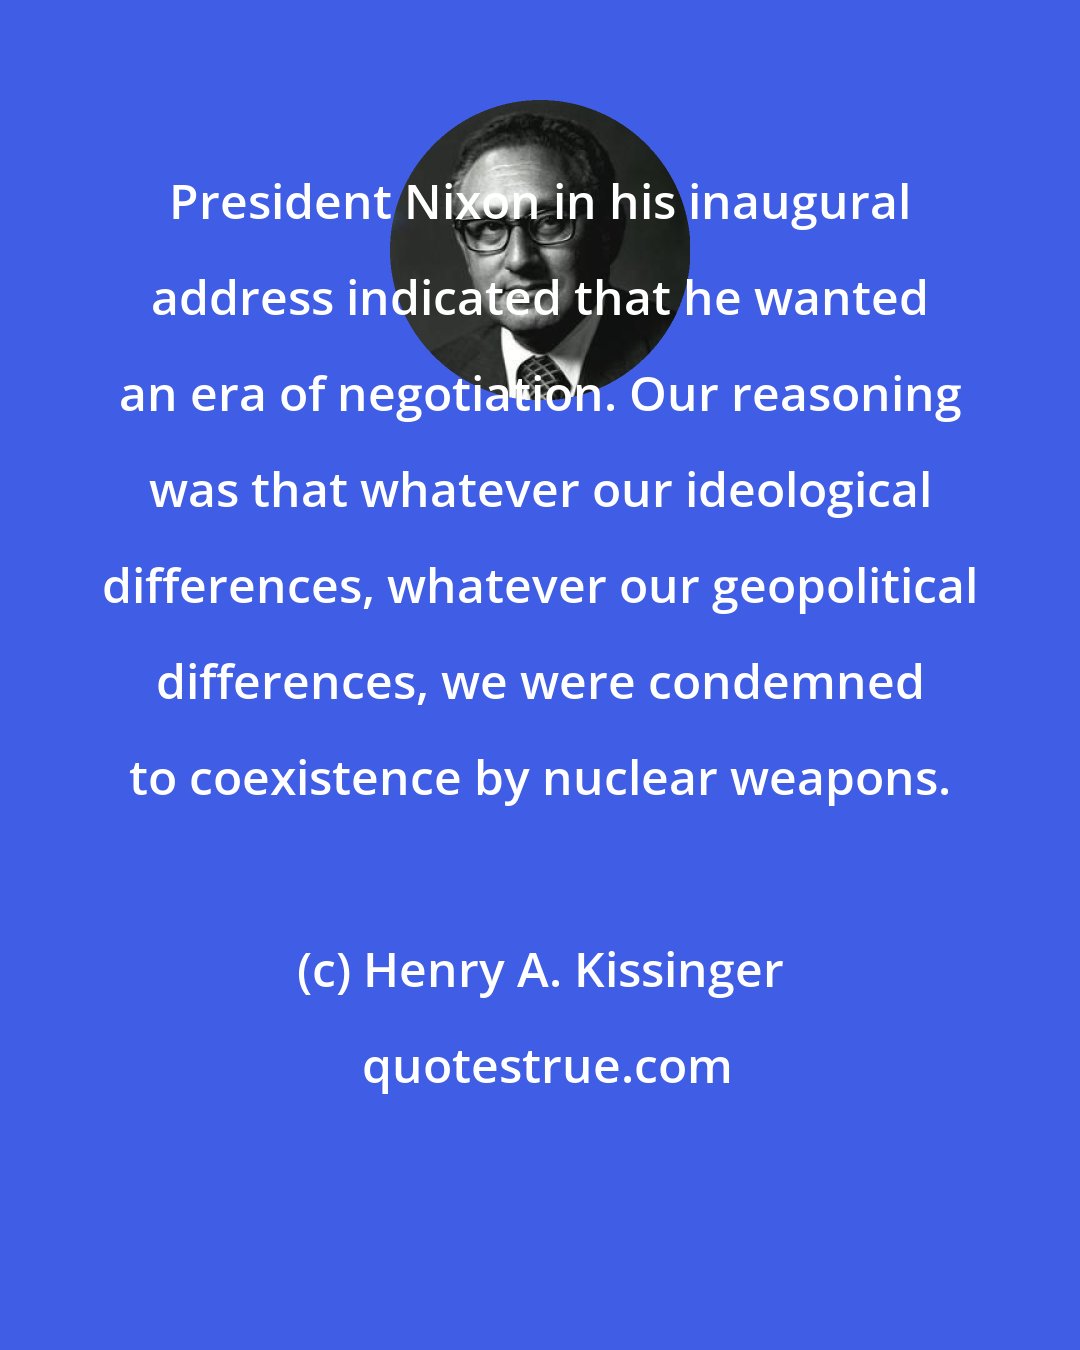 Henry A. Kissinger: President Nixon in his inaugural address indicated that he wanted an era of negotiation. Our reasoning was that whatever our ideological differences, whatever our geopolitical differences, we were condemned to coexistence by nuclear weapons.